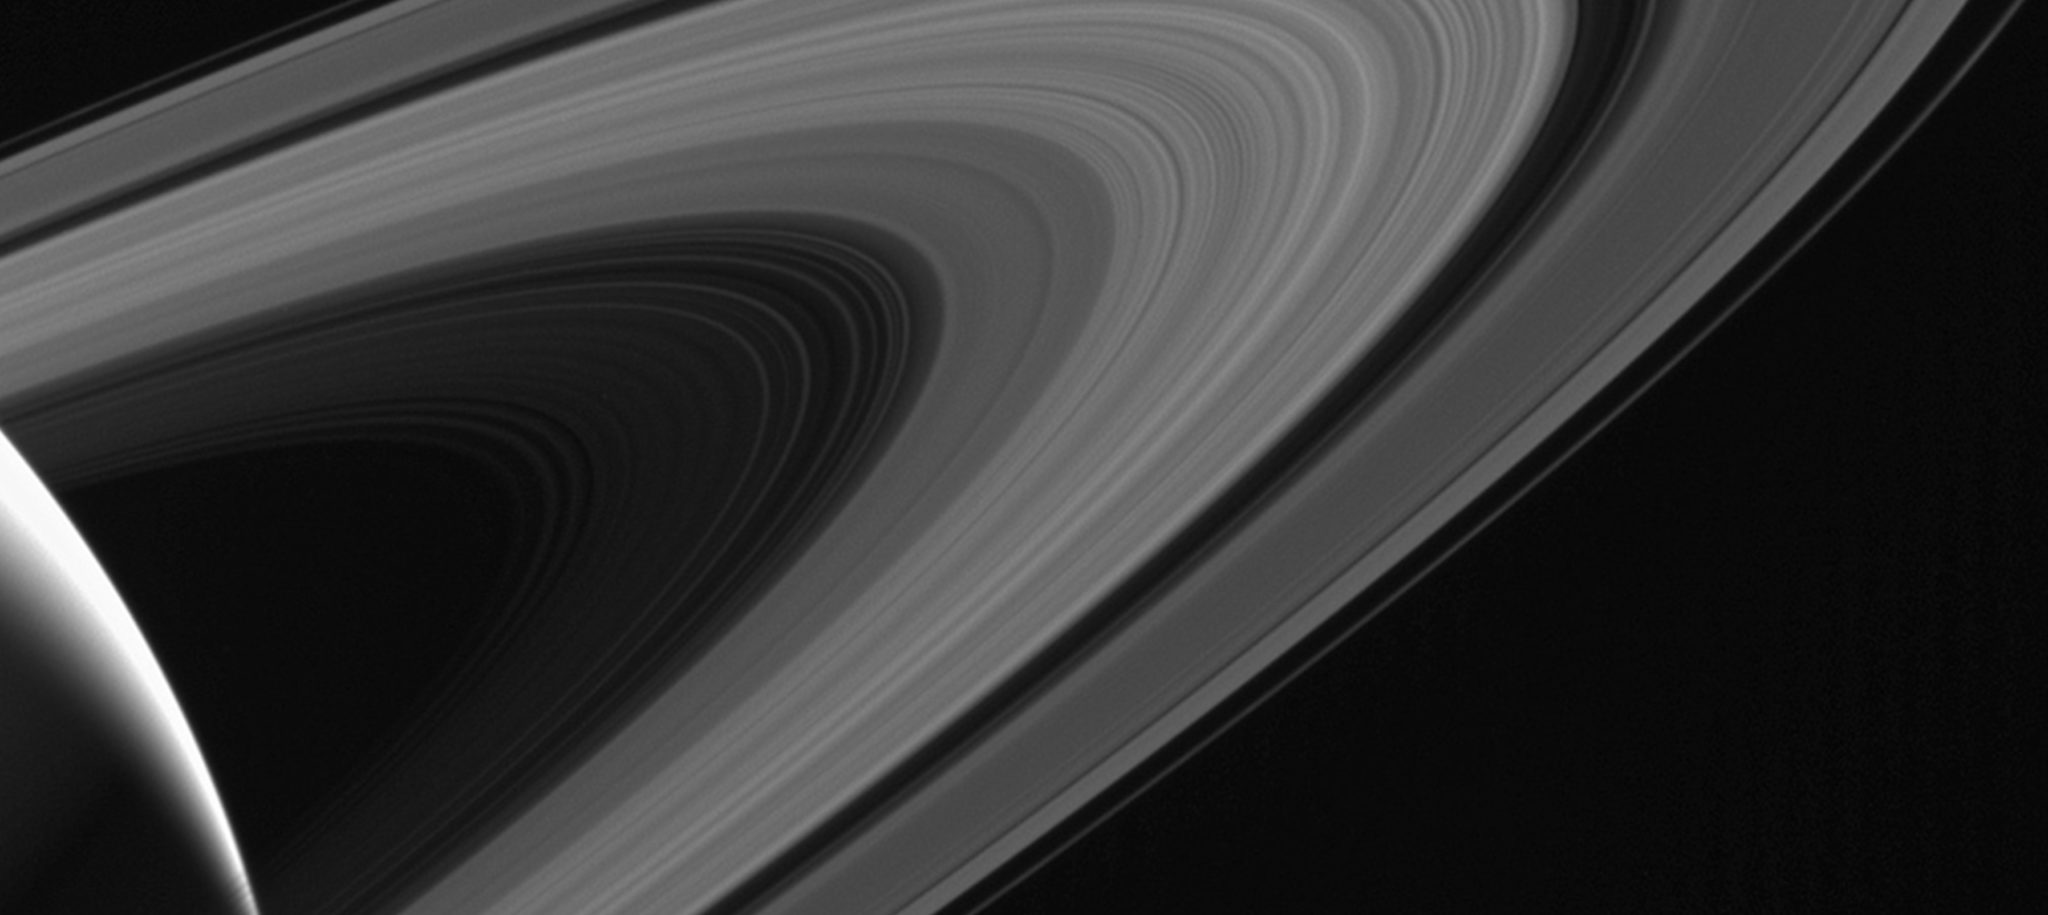 Saturn and it's rings